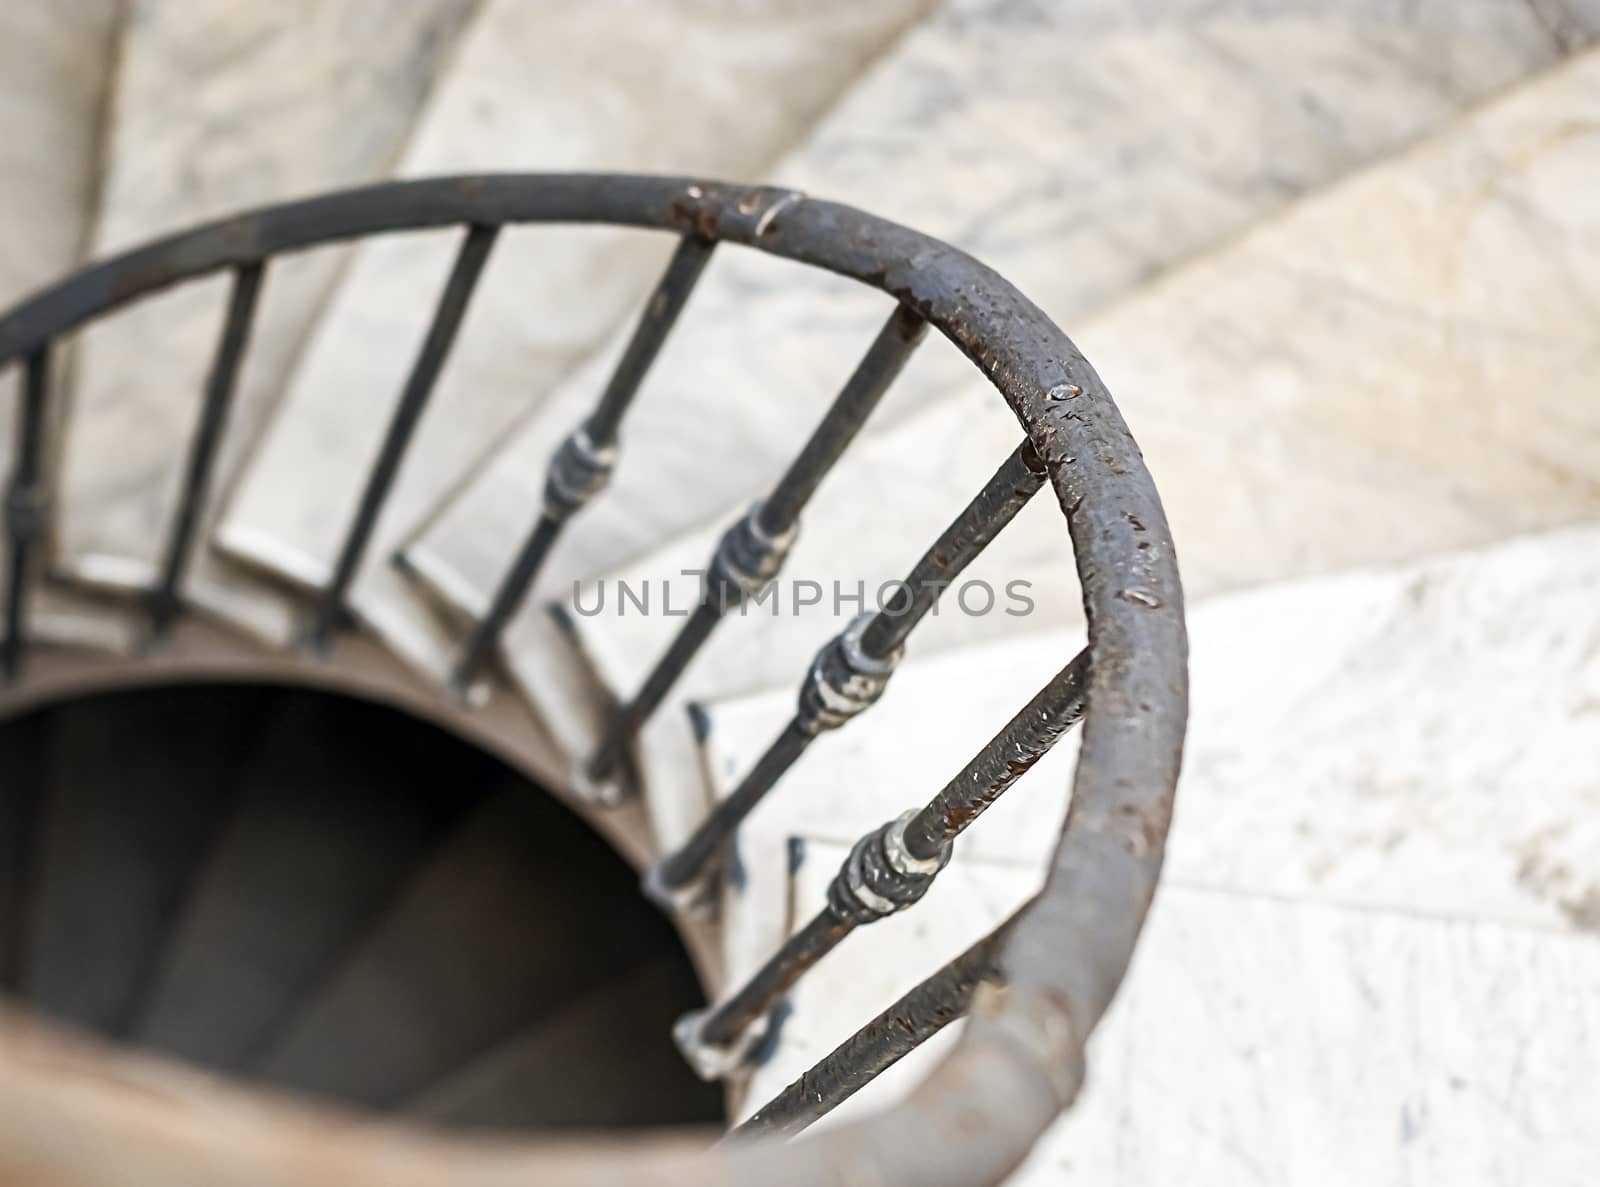 ancient spiral staircase with marble steps and wrought iron handrail. Architecture and circular shape